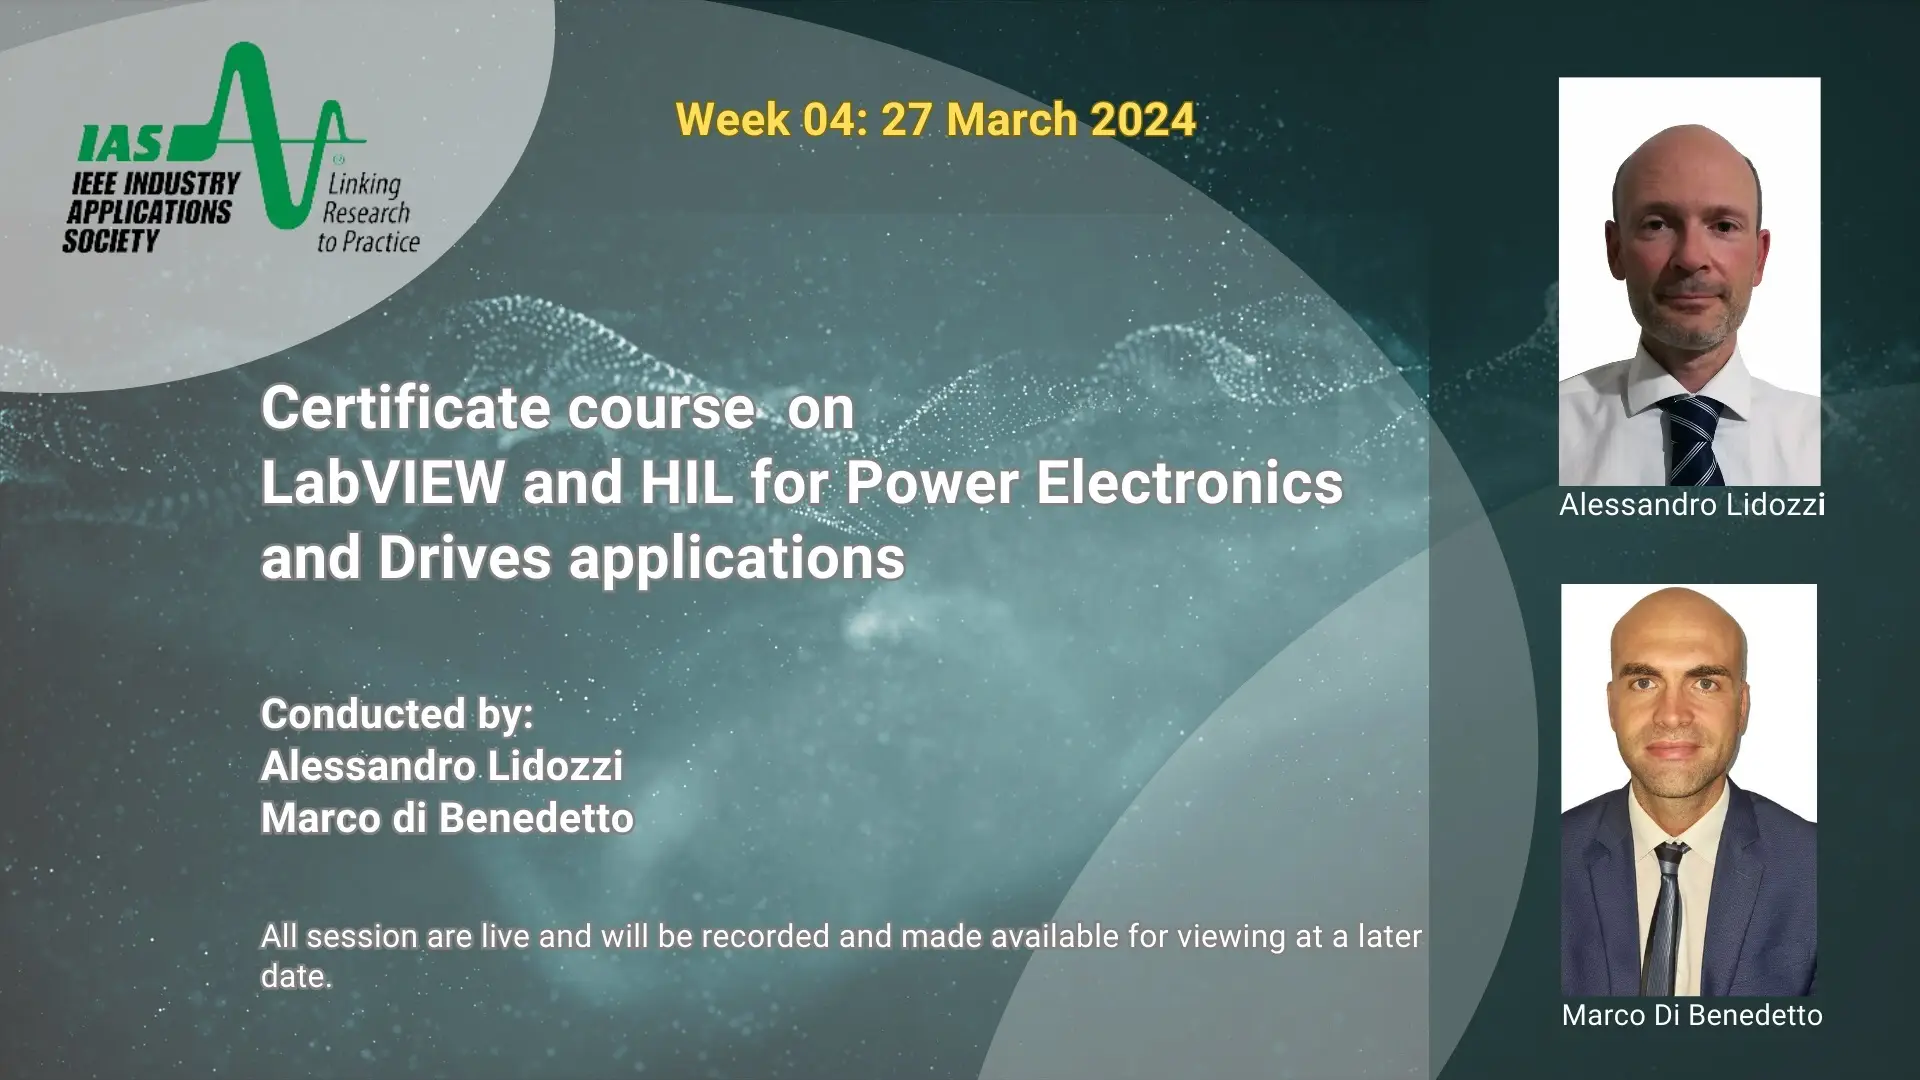 Week 04: Certificate Course on LabVIEW and HIL for Power Electronics and Drives Applications